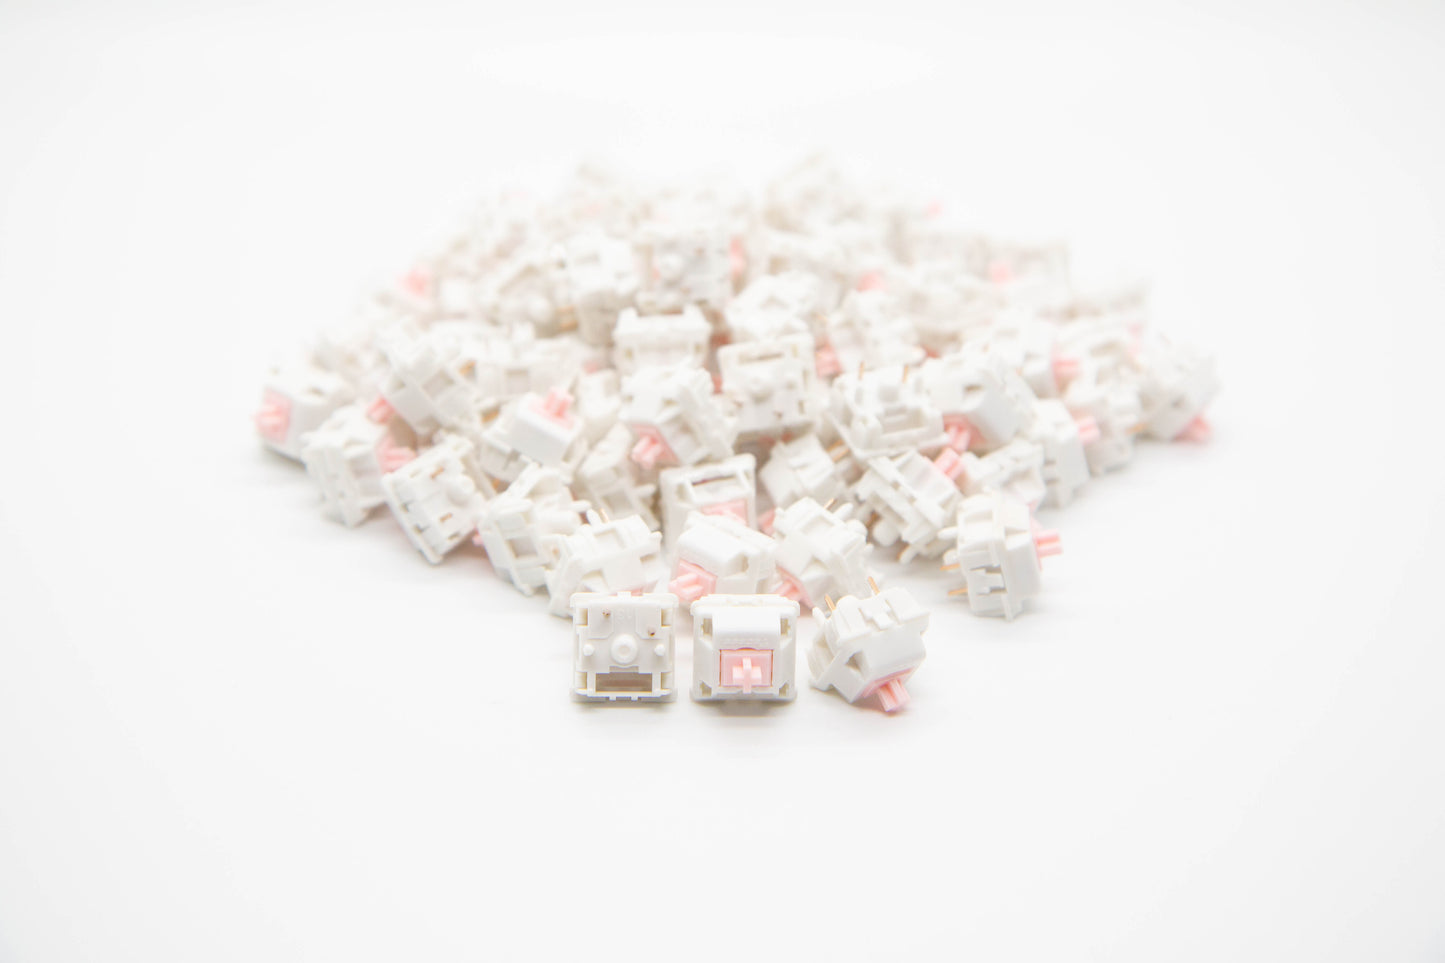 Close-up shot of a pile of Strawberry Milk - Tactile themed mechanical keyboard switches featuring white housing and light pink stems